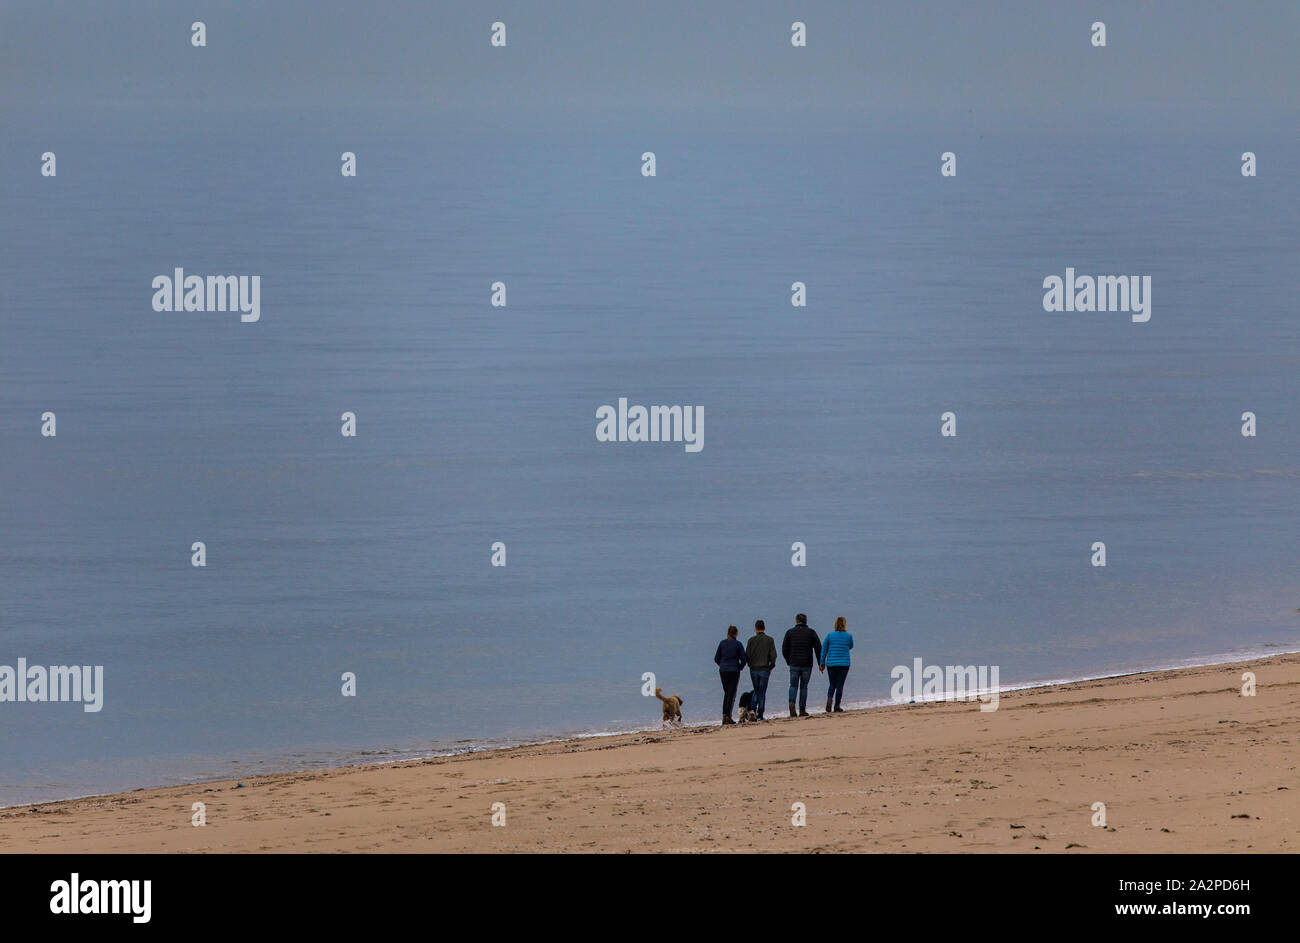 People walk on a sandy beach, walk with dogs, Stock Photo